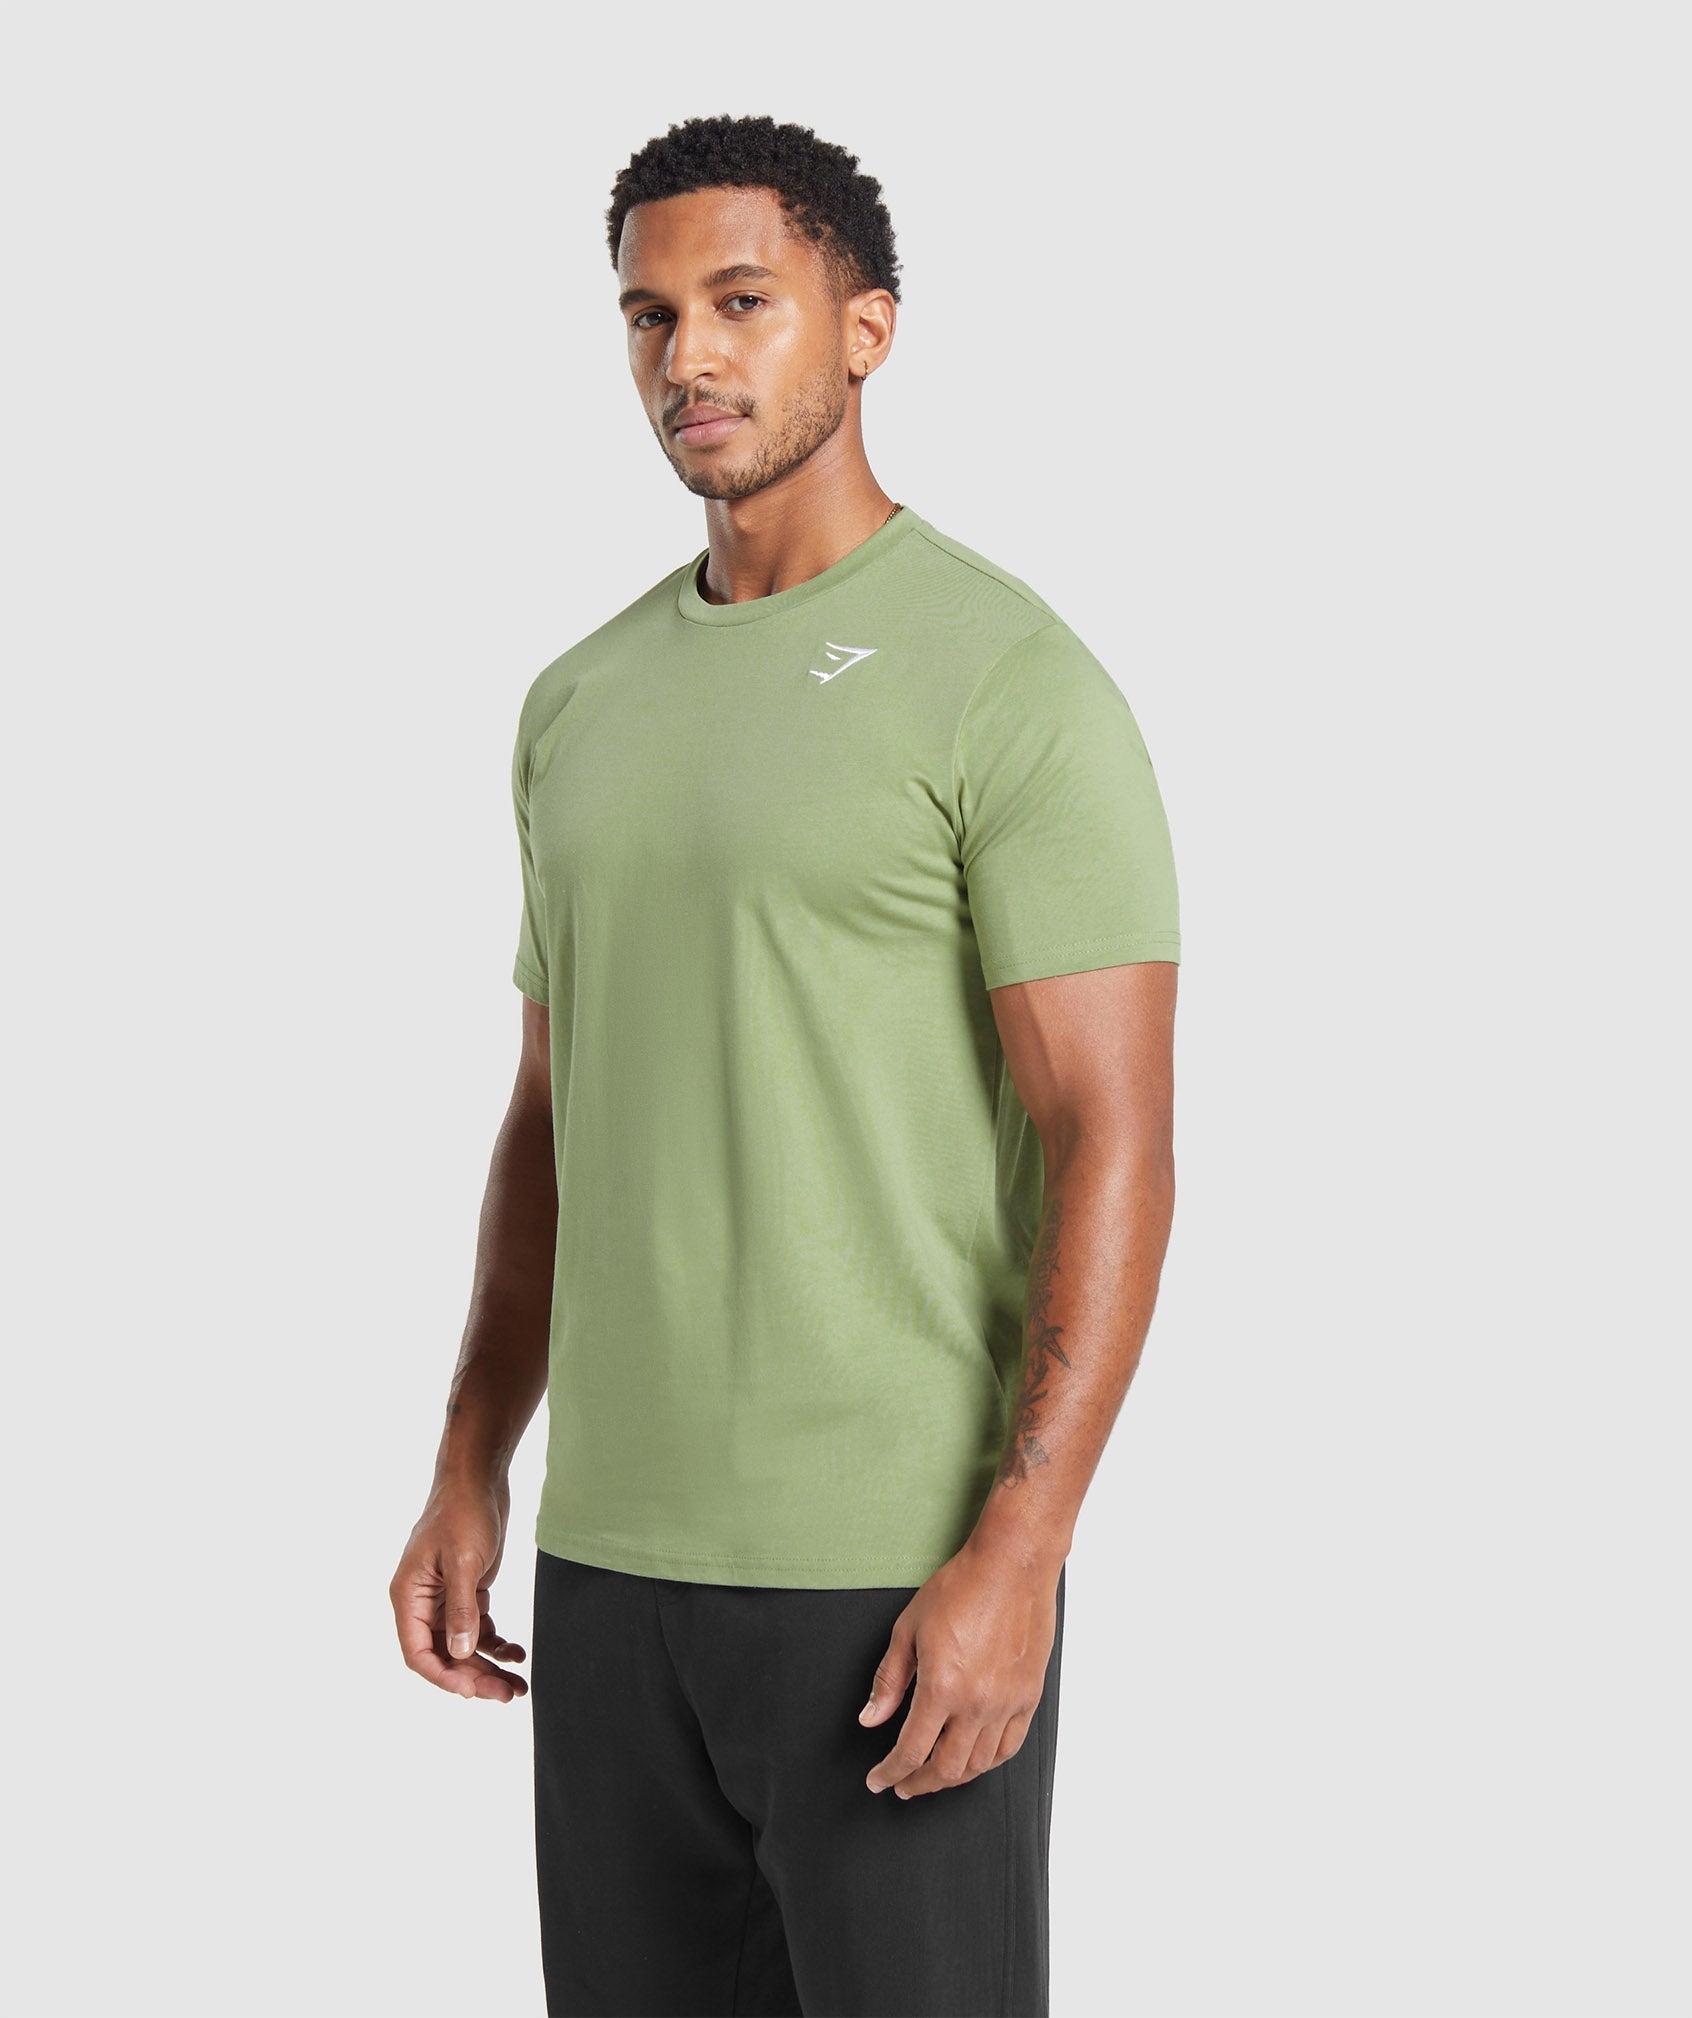 Crest T-Shirt in Natural Sage Green - view 3